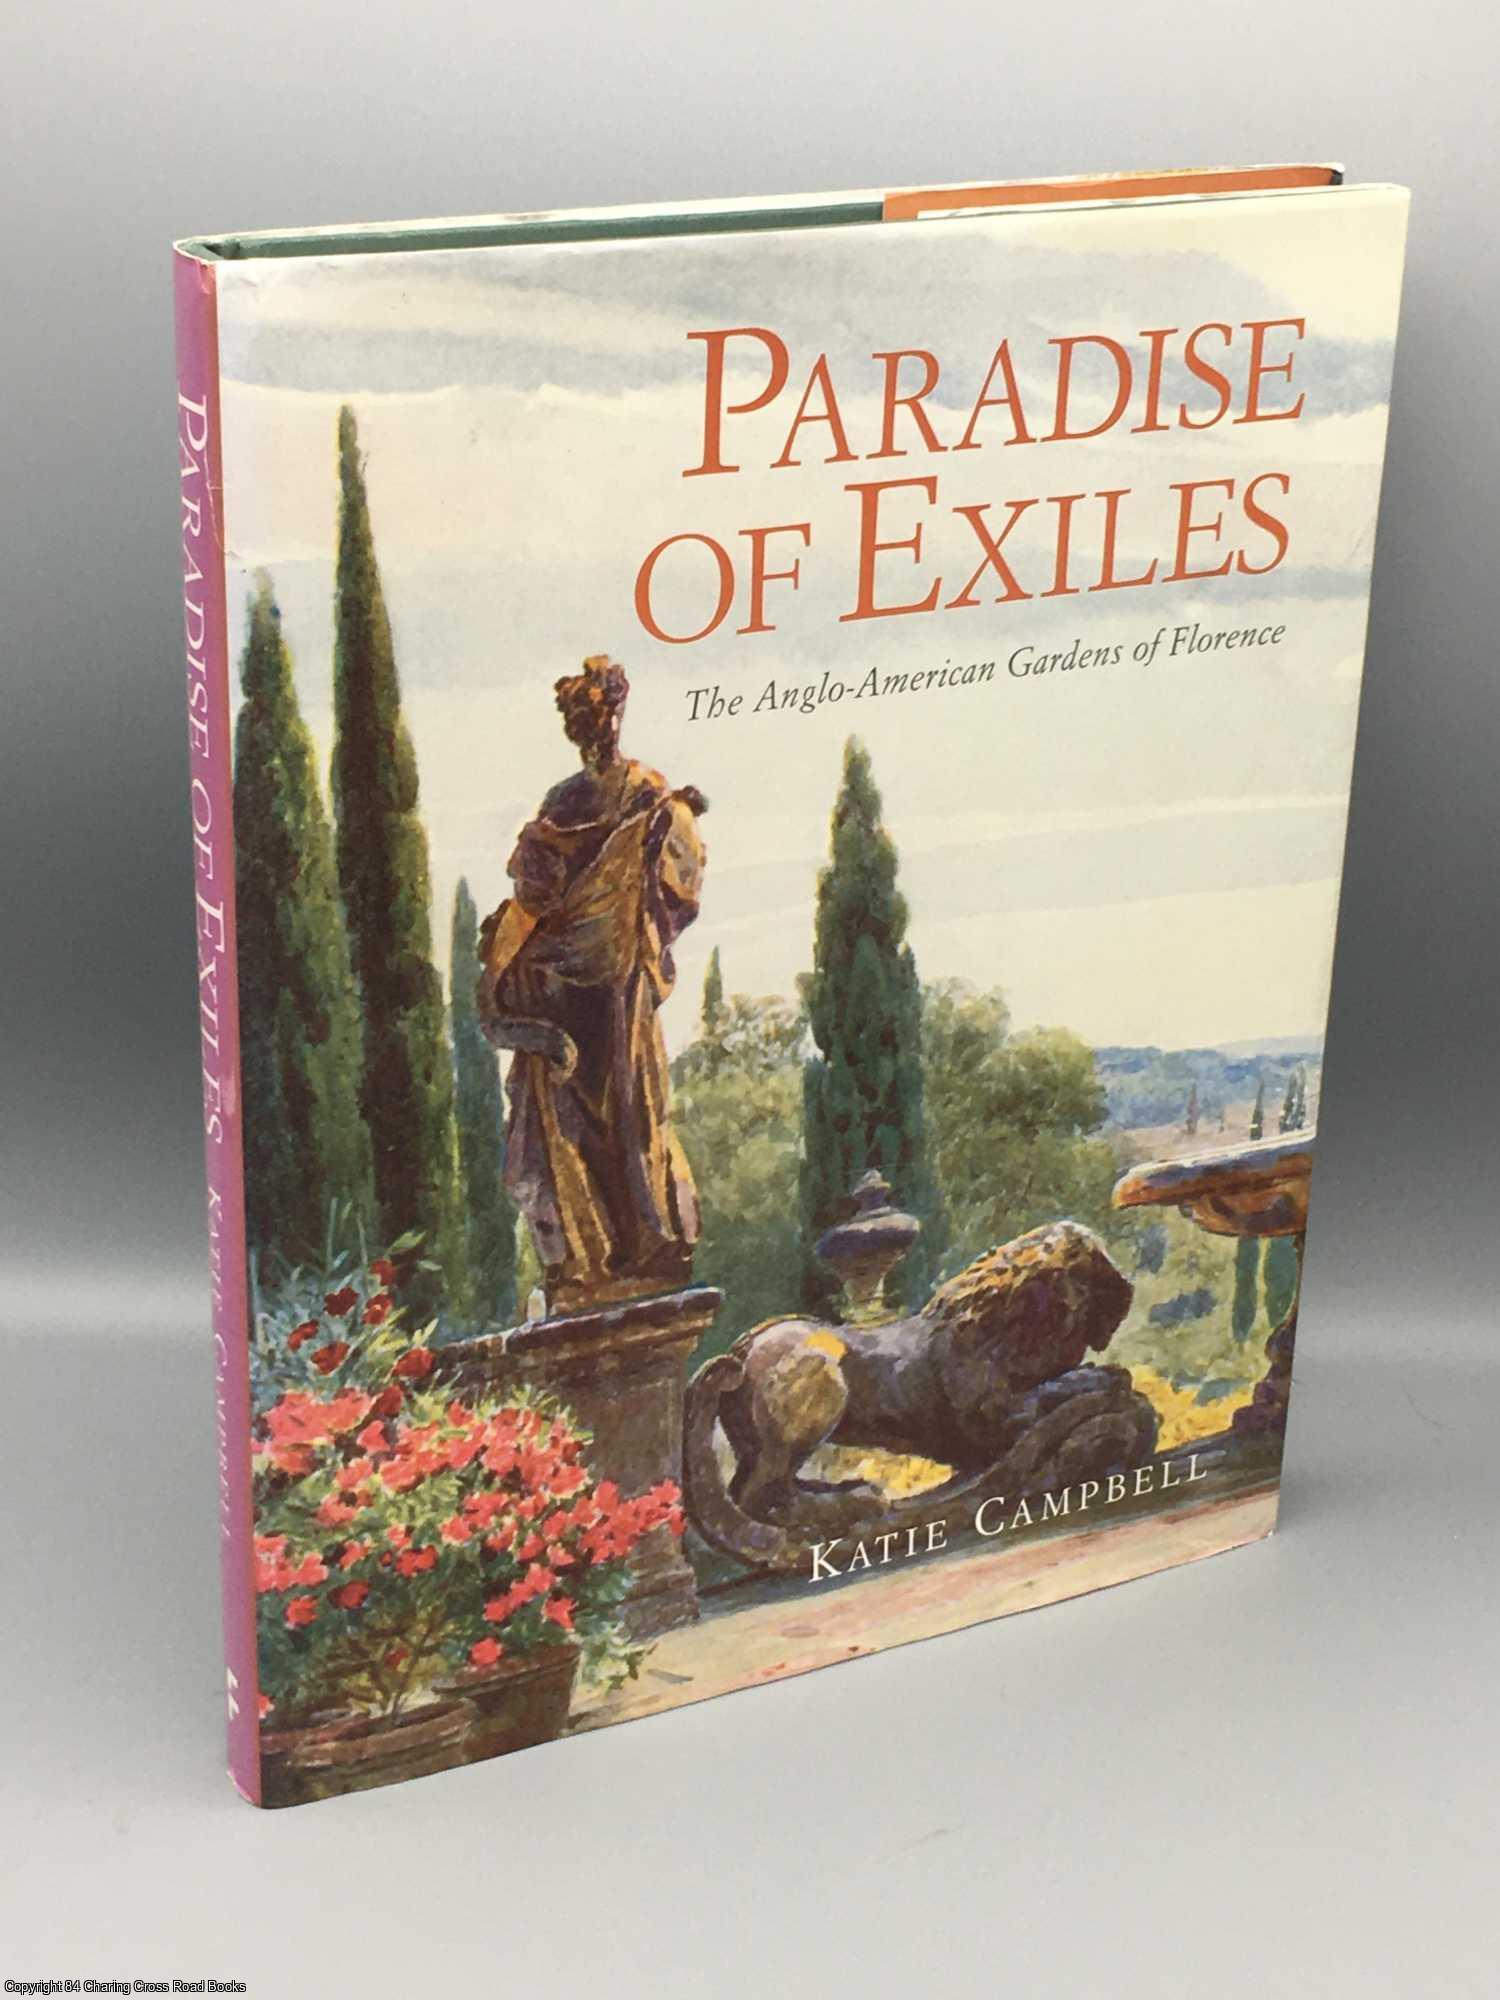 Campbell, Katie - Paradise of Exiles